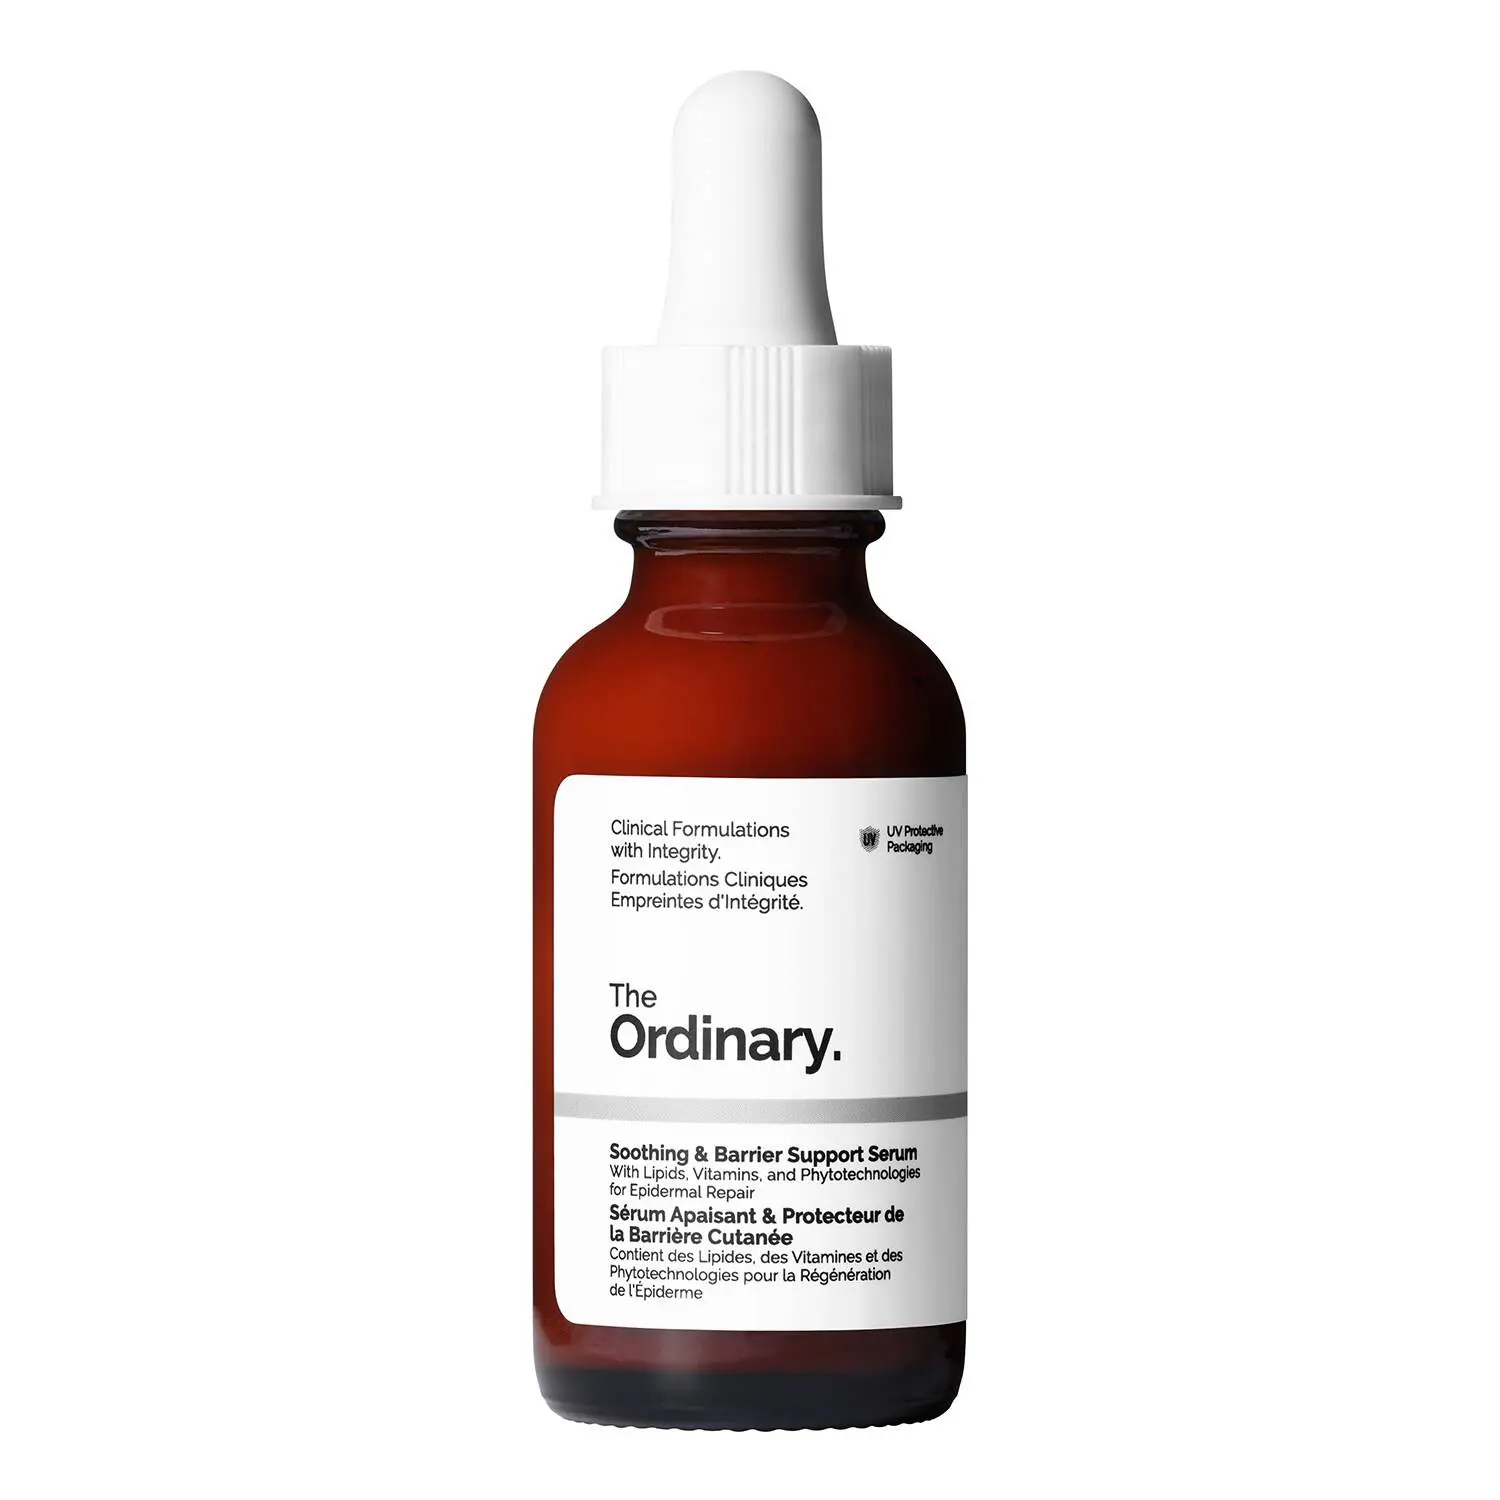 The Ordinary Soothing & Barrier Support Serum 30ml Discounts and Cashback